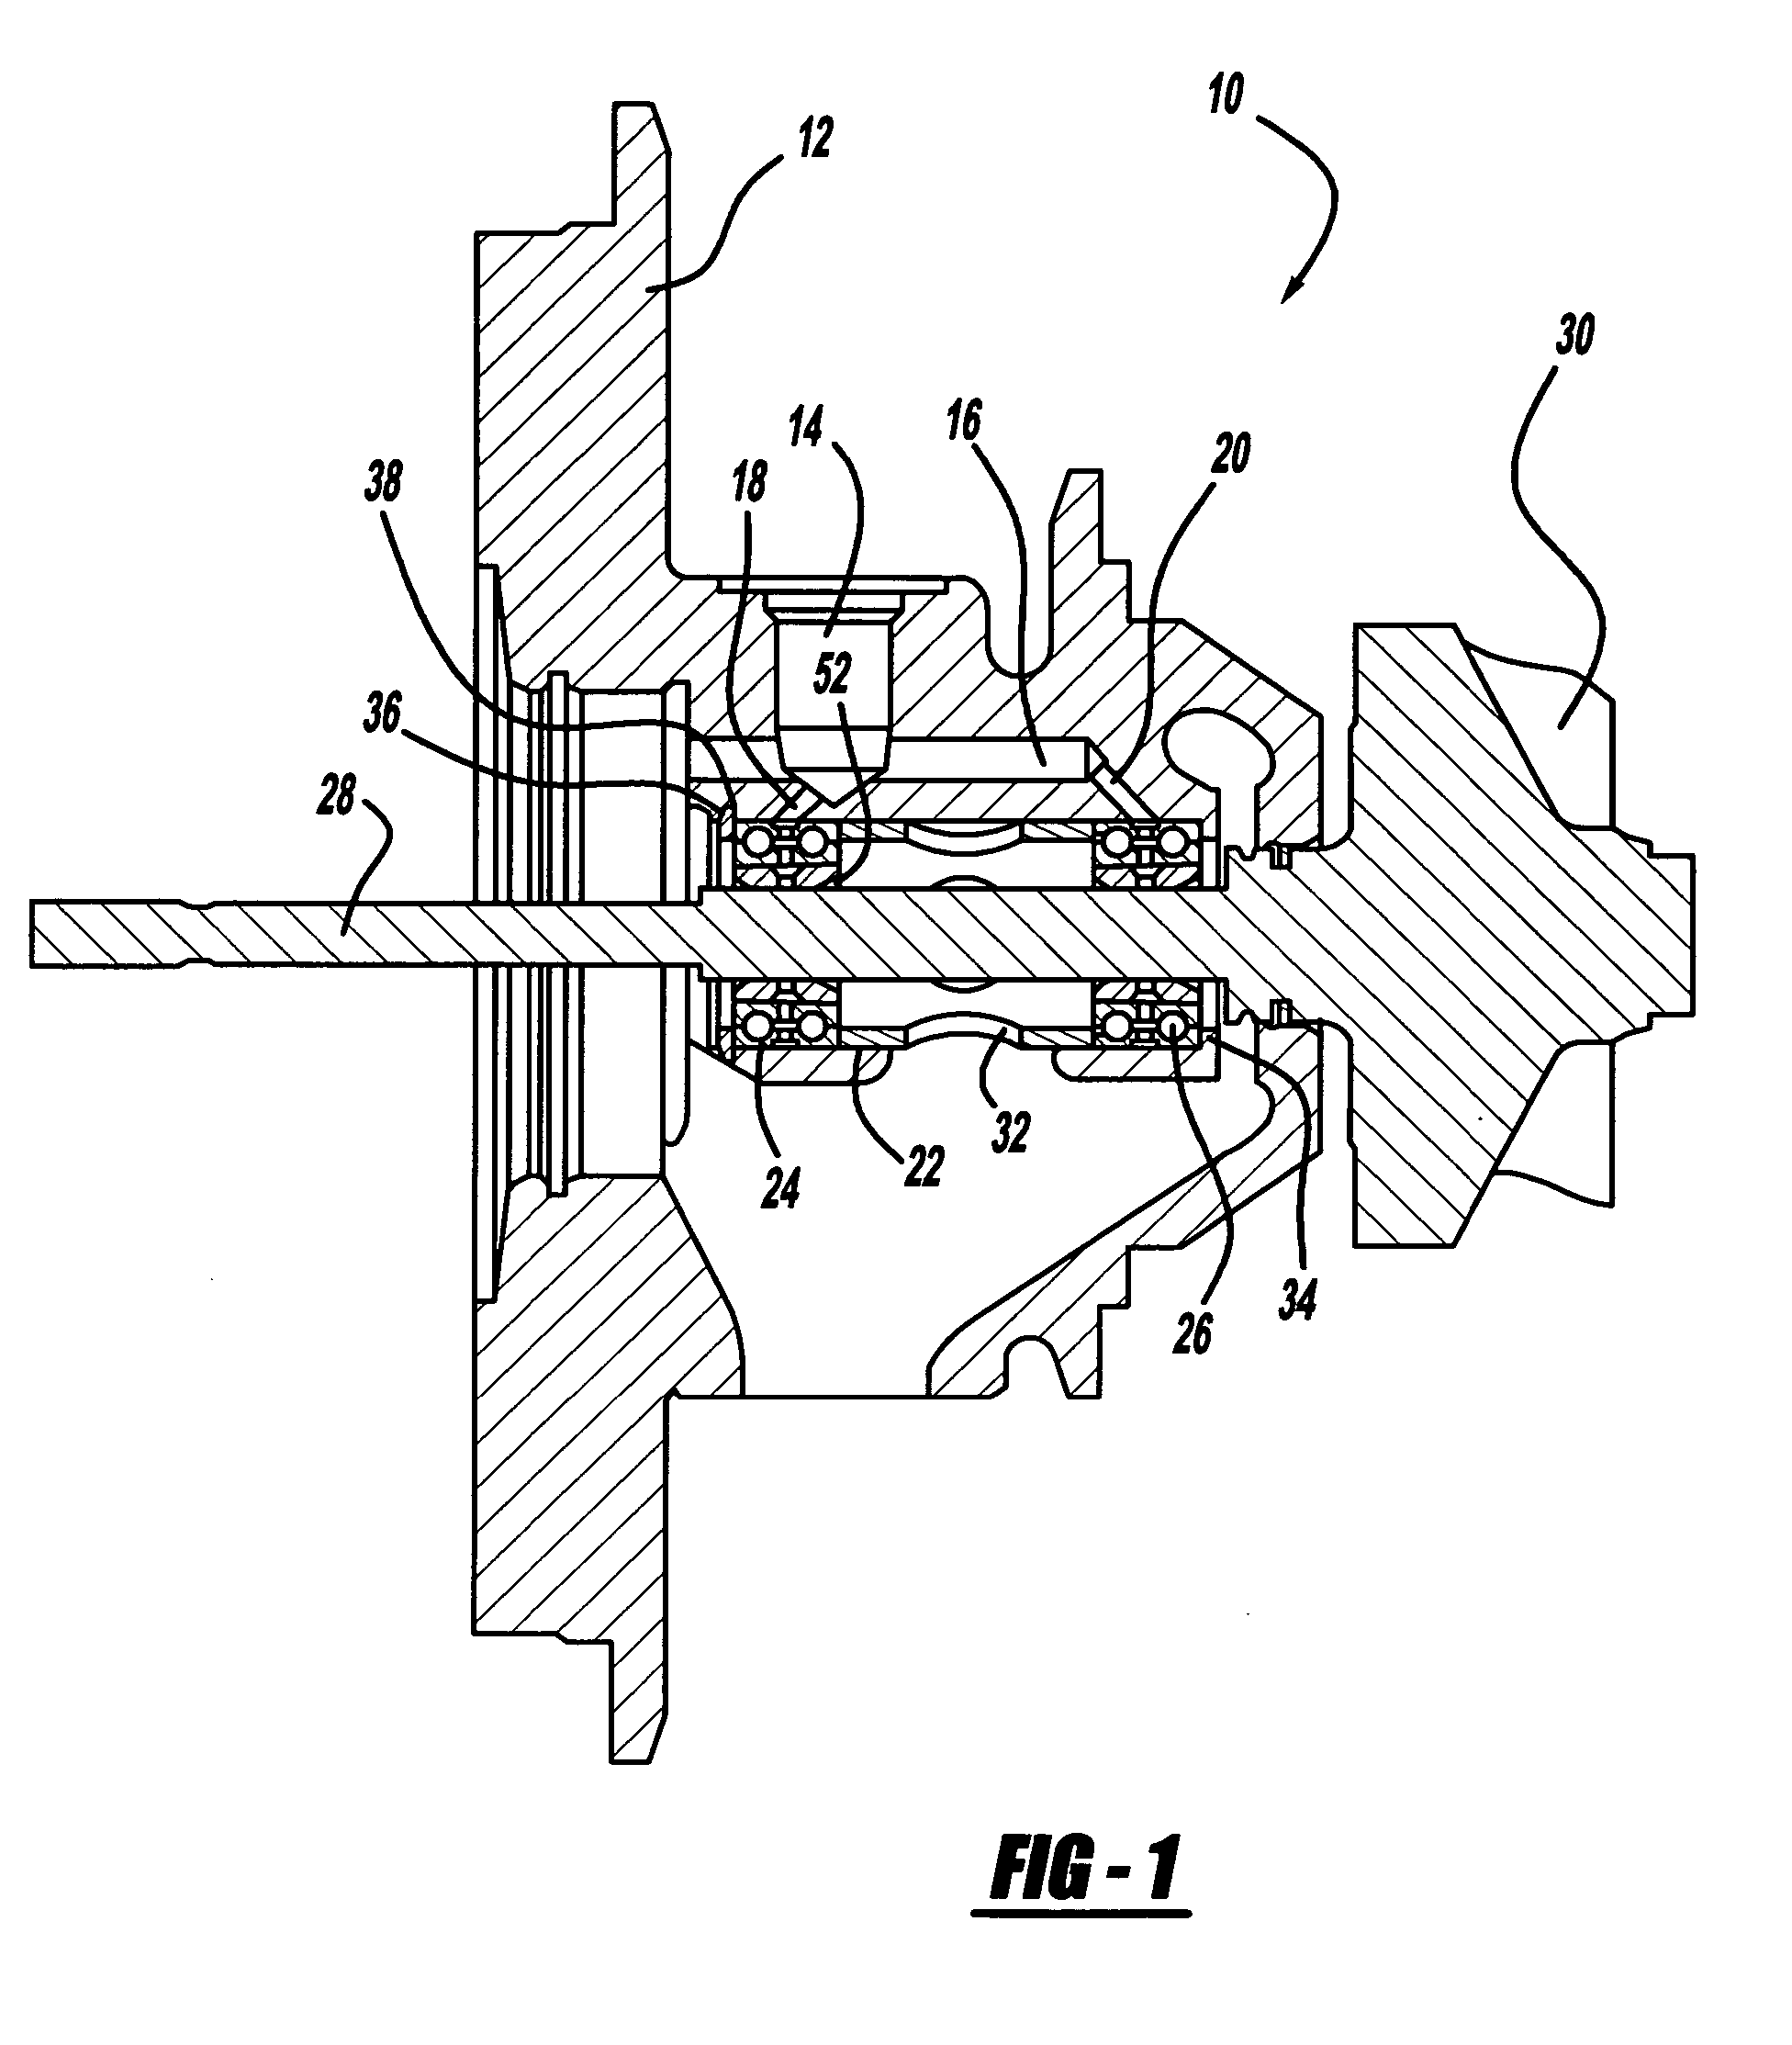 Combination hydrodynamic and rolling bearing system